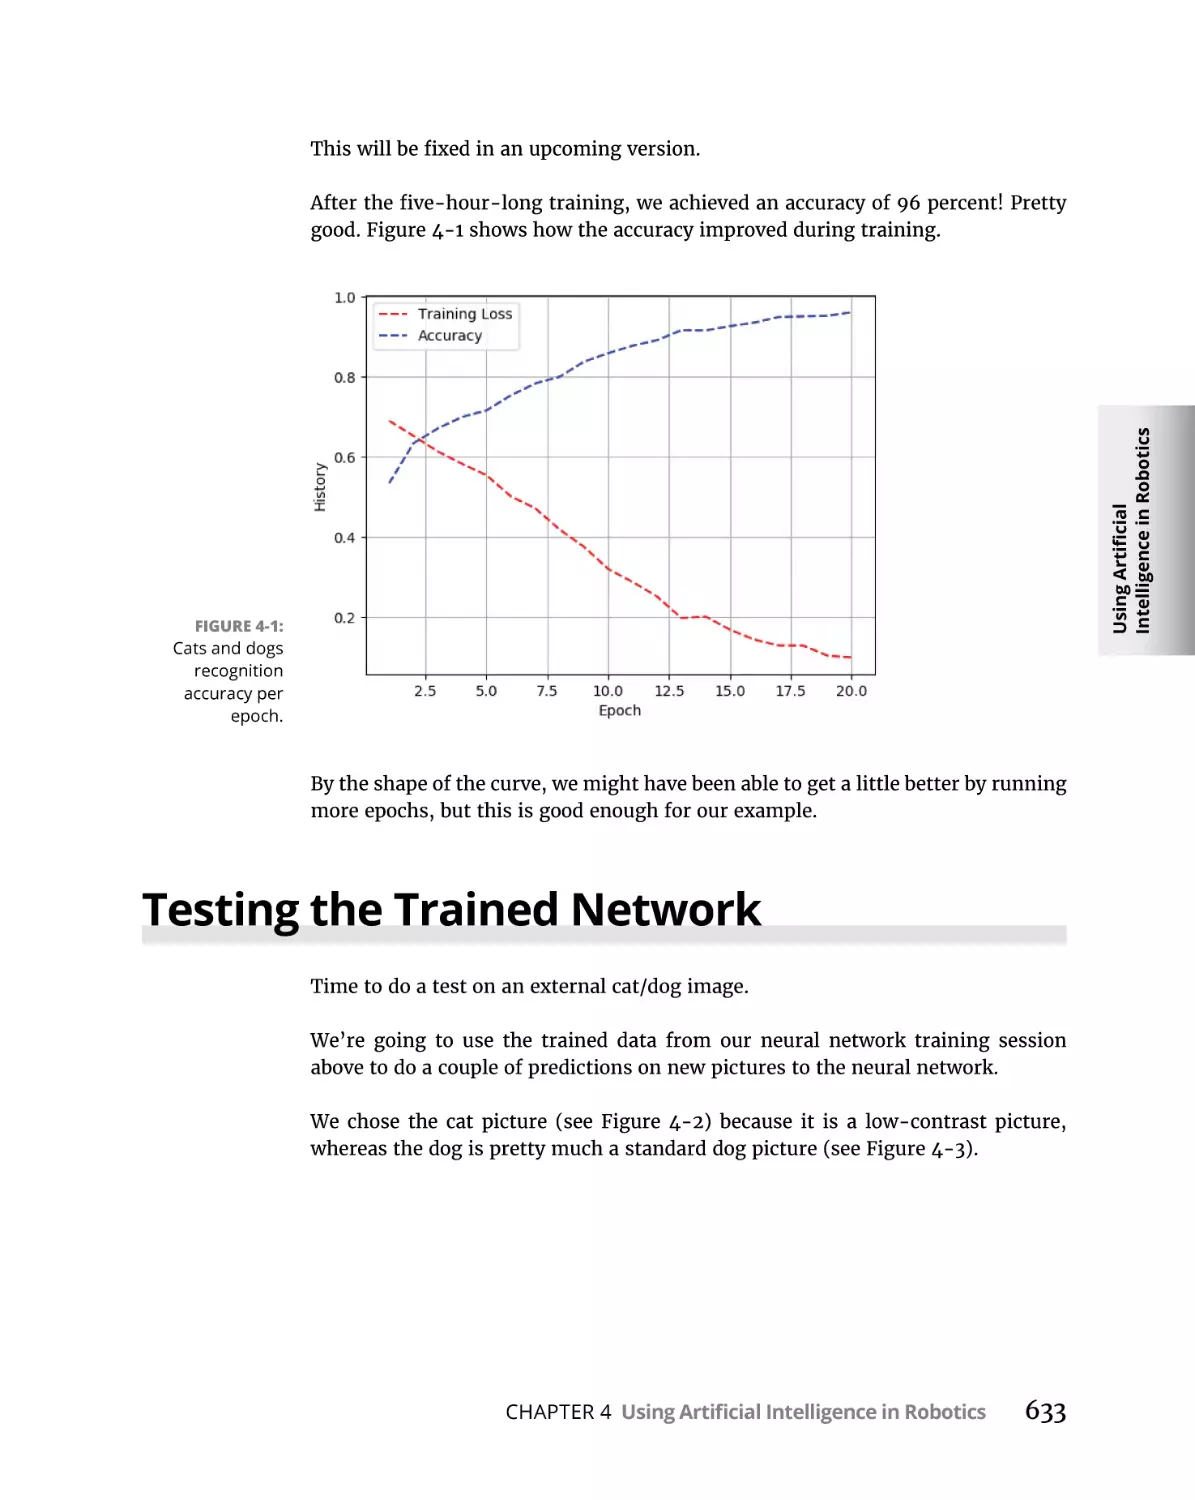 Testing the Trained Network